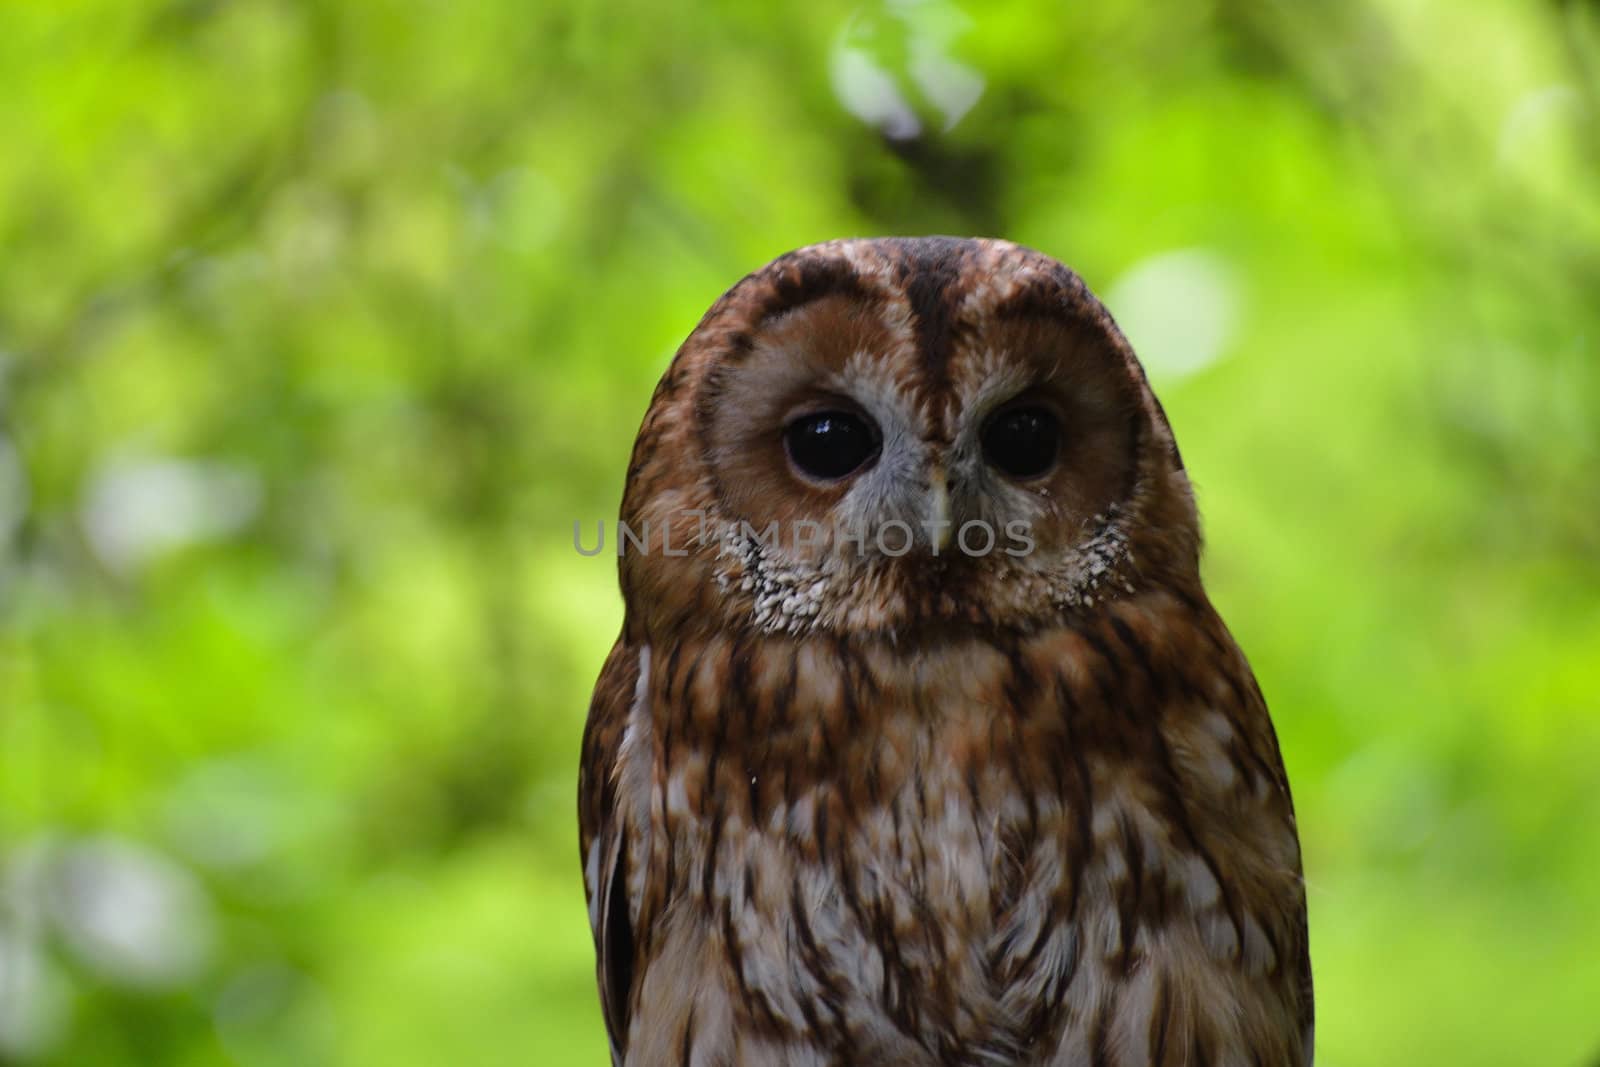 Brown Owl by pauws99